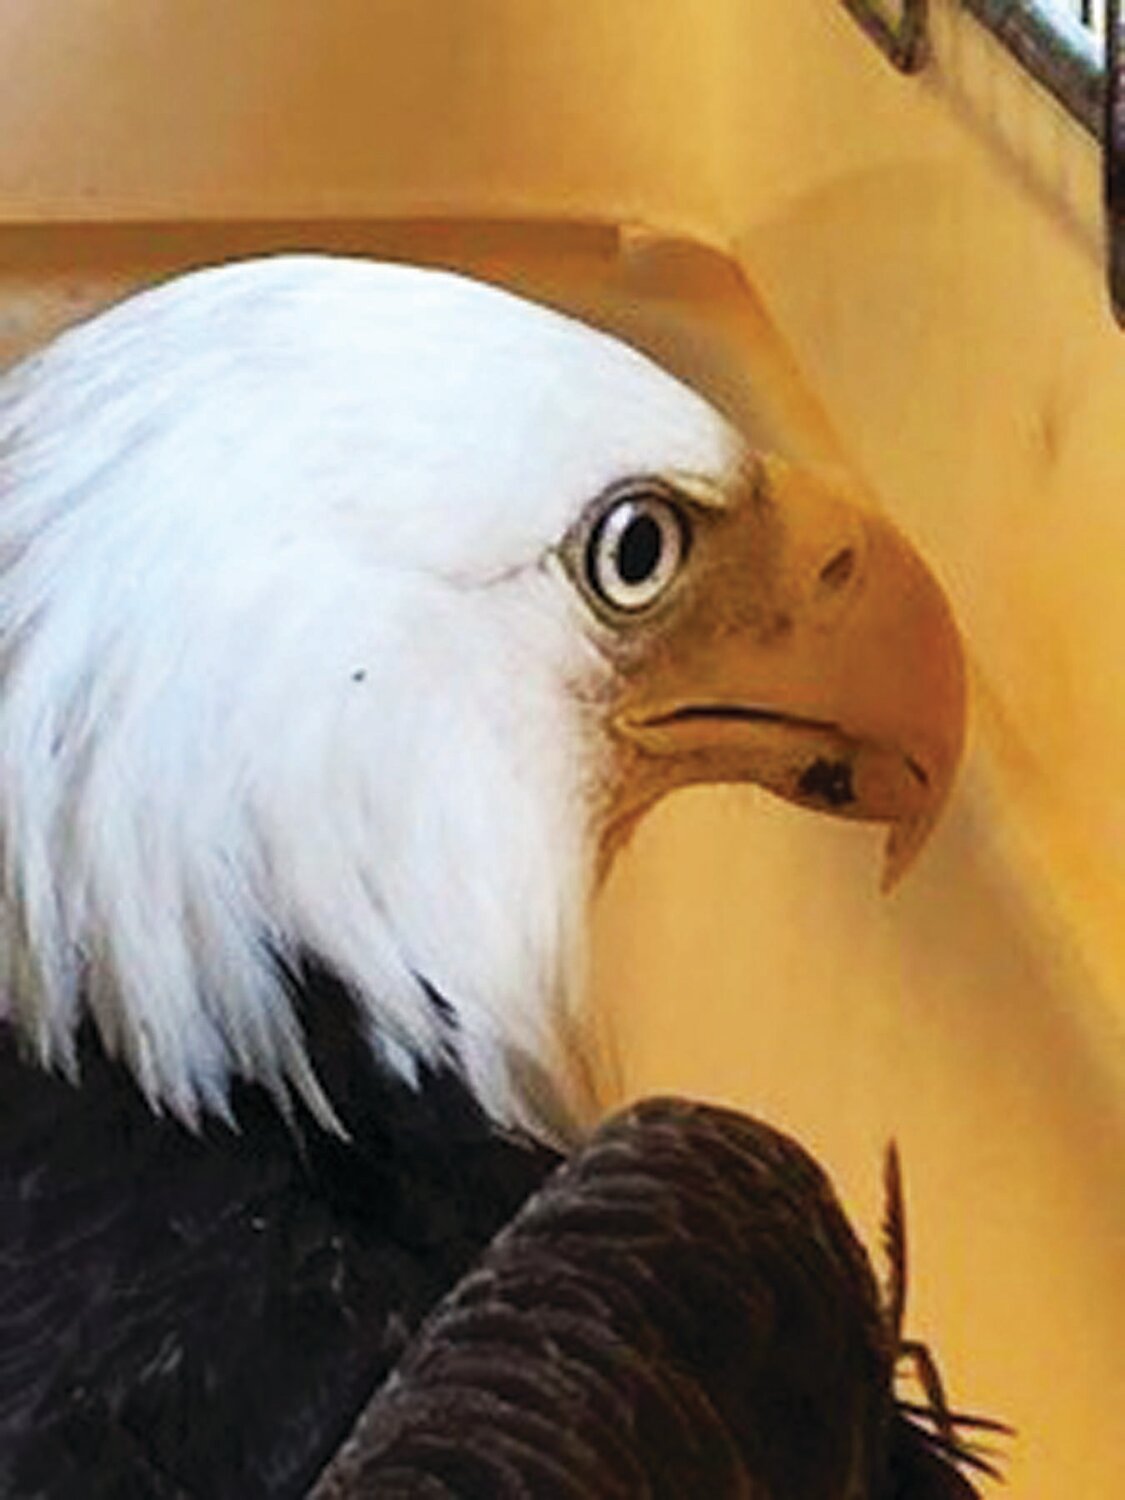 The injured Solebury Bald Eagle is recuperating at the Chalfont Aark Wildlife Rehabilitation & Rehabilitation Center after getting life-saving care.